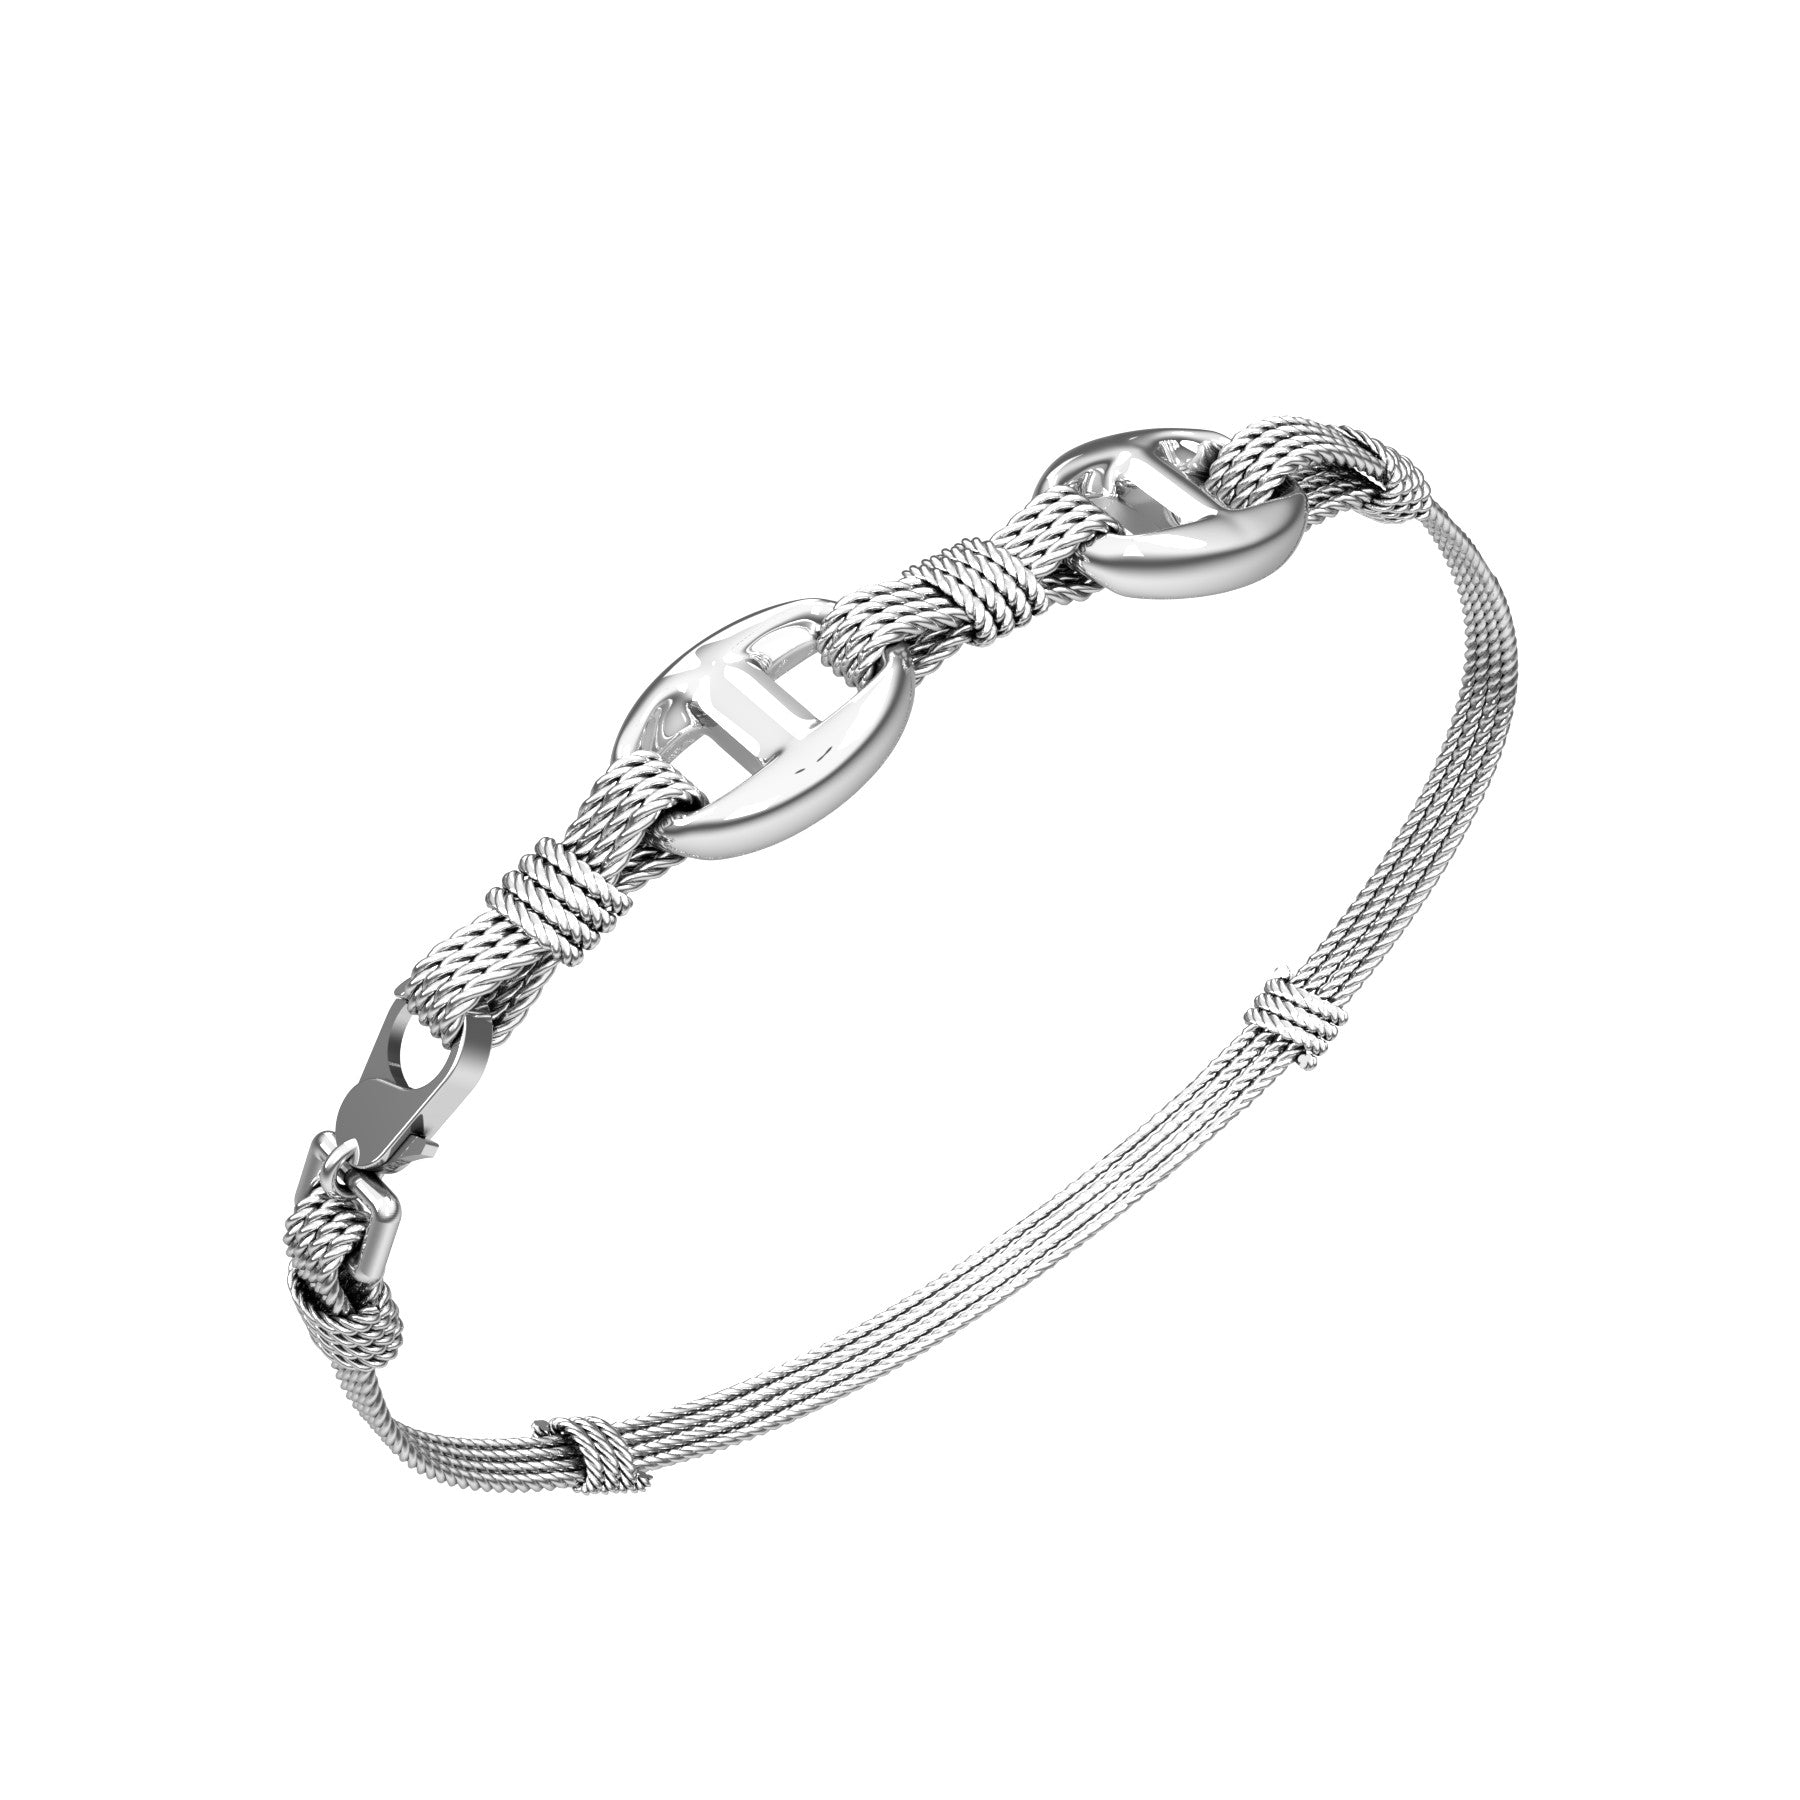 marine links and ropes bracelet, sterling silver, weight about 9,50 g (0,34 oz),  width 15 mm